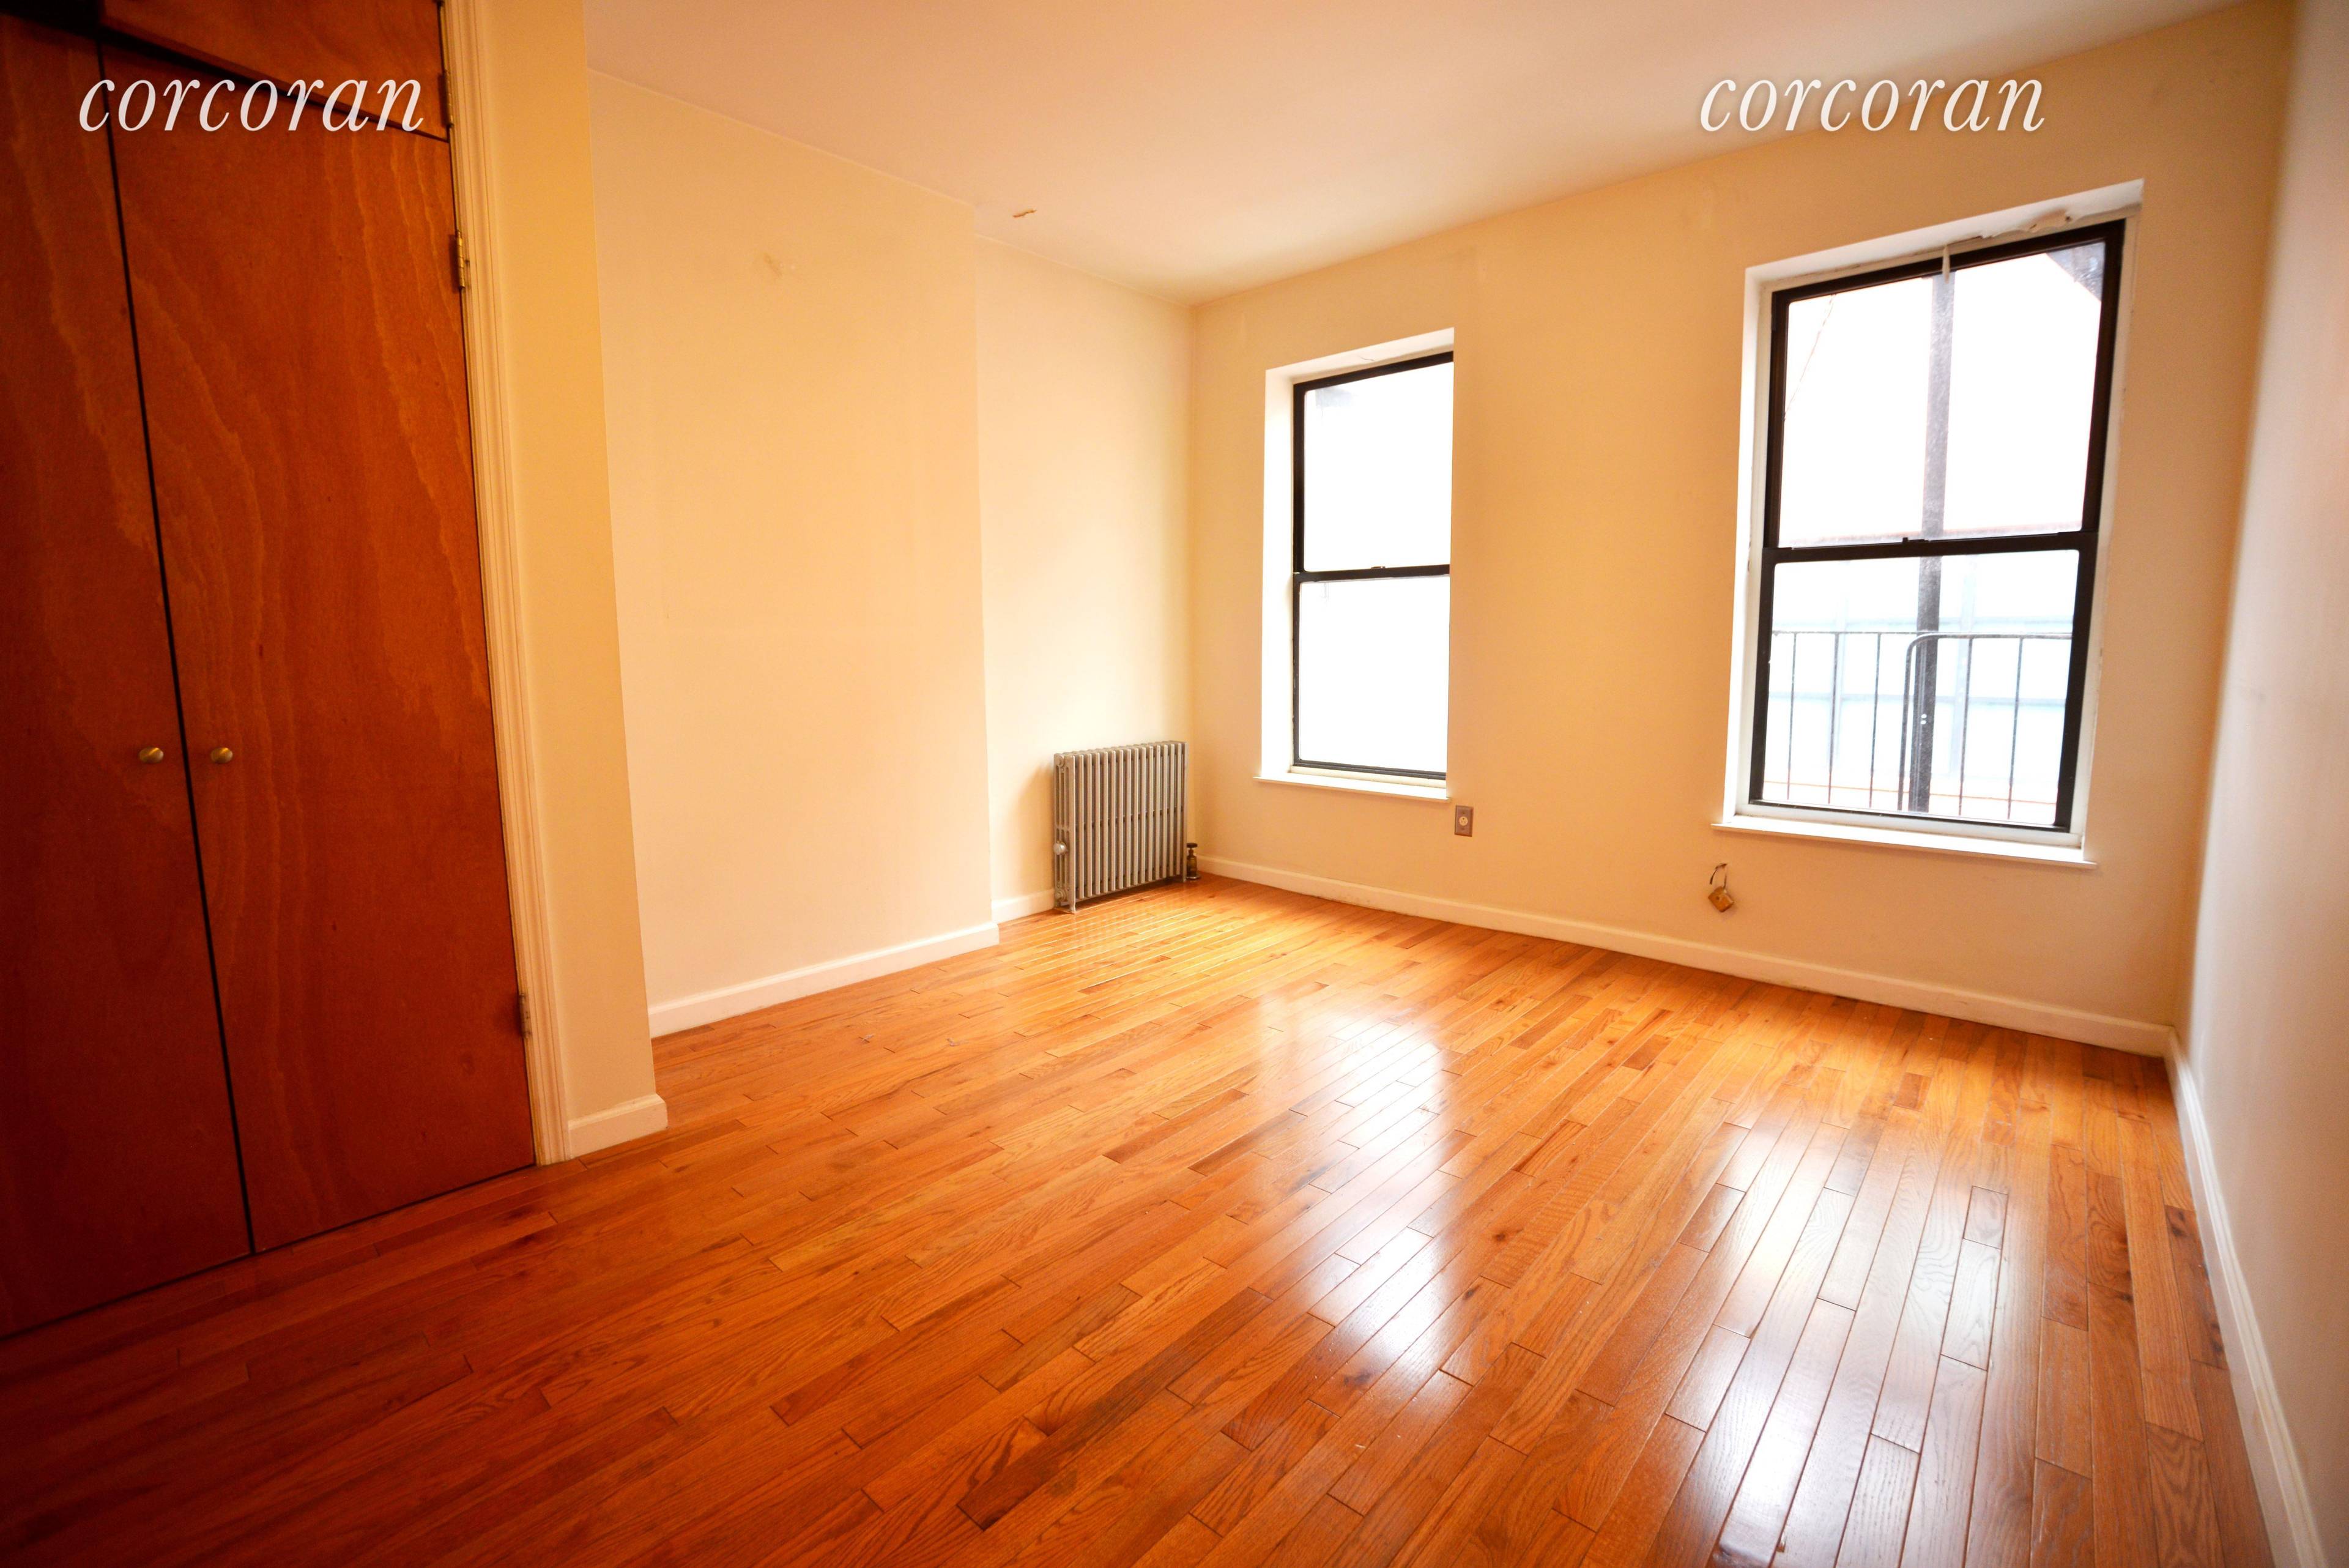 Great Deal just renovated for Rent stabilize building Nice one bedroom Brand new hardwood floor Separate kitchen amp ; Diningroom Tones of sunlights 5 min to subway 3 min to ...